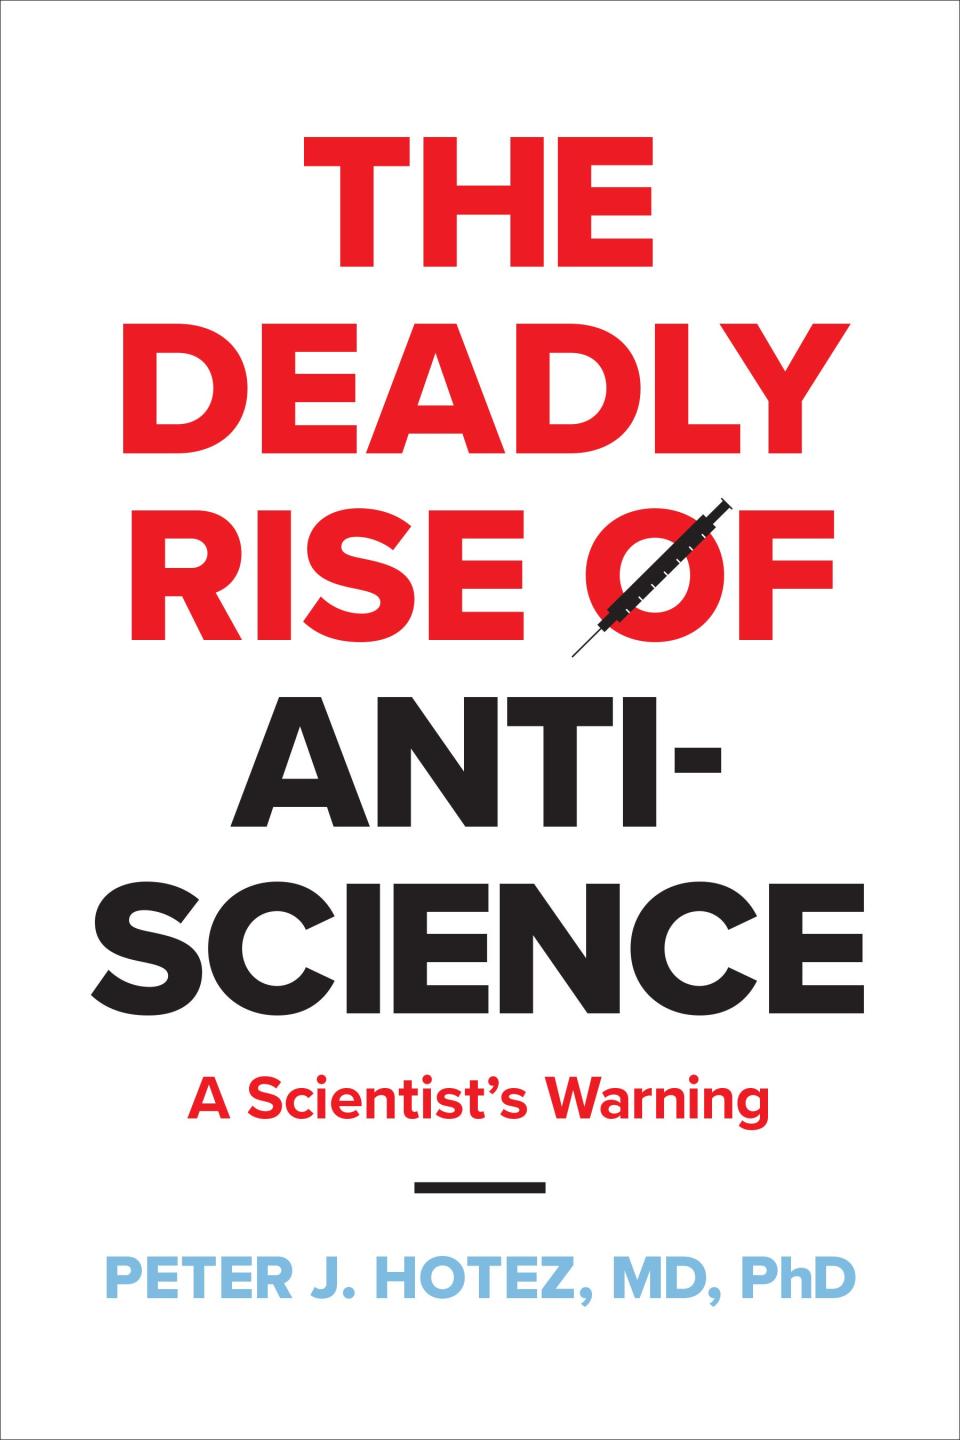 Infectious disease expert Dr. Peter Hotez has written a new book warning about what he sees as a concerning increase in anti-science sentiments.